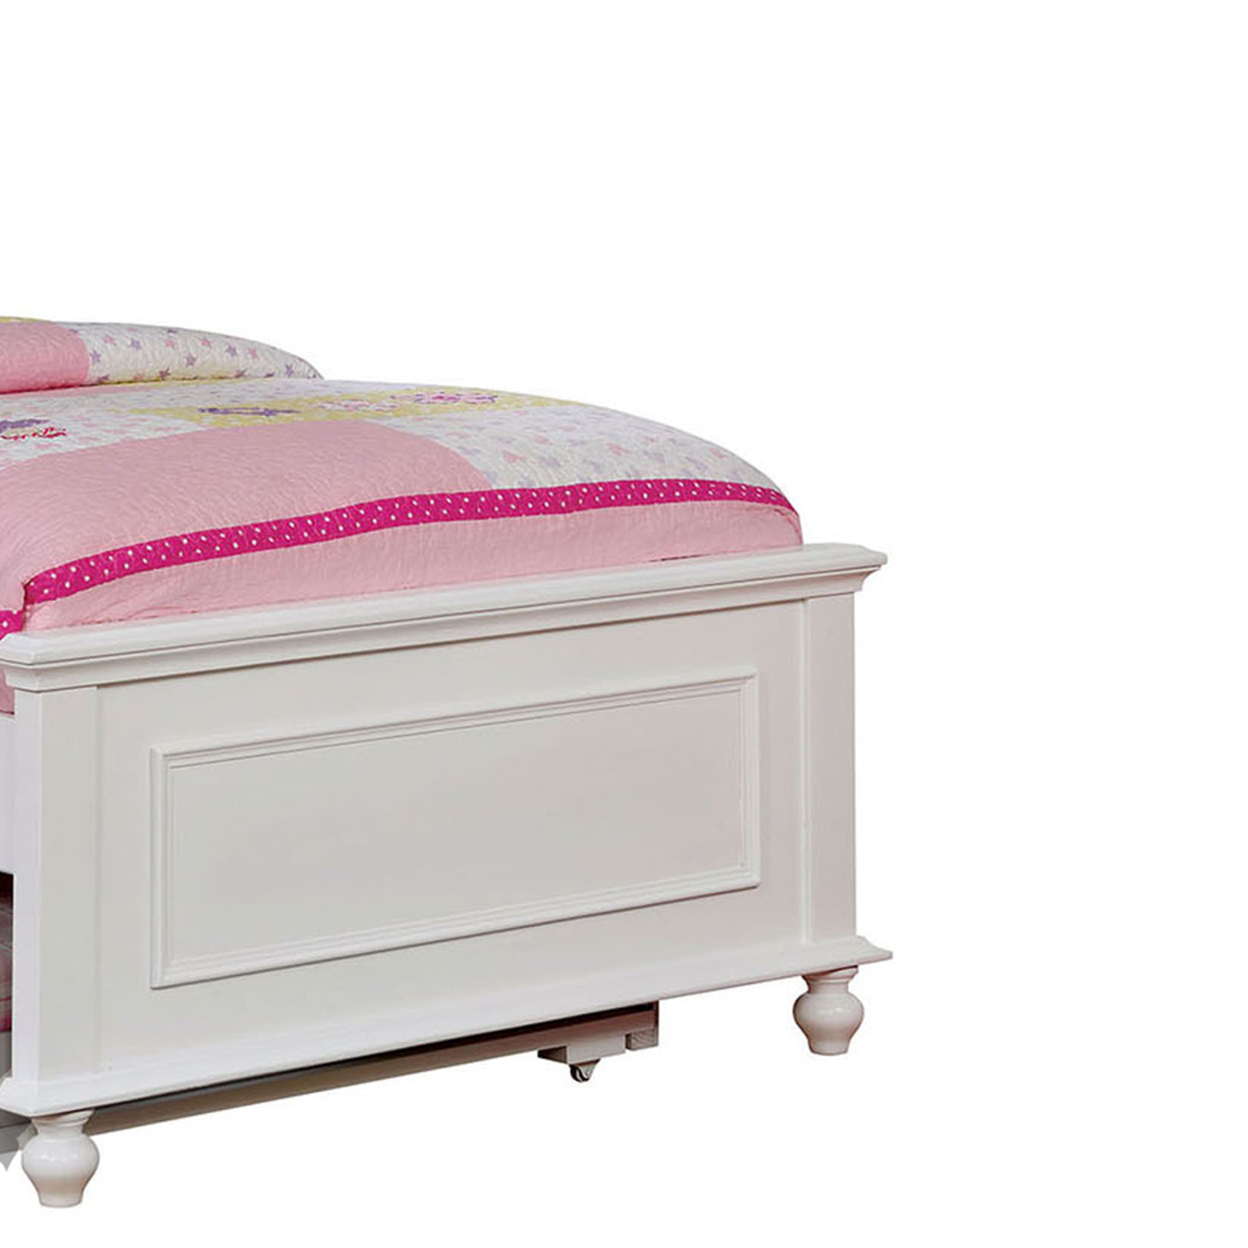 Wooden Twin Size Bed With Camelback Design Headboard And Turned Legs, White- Saltoro Sherpi